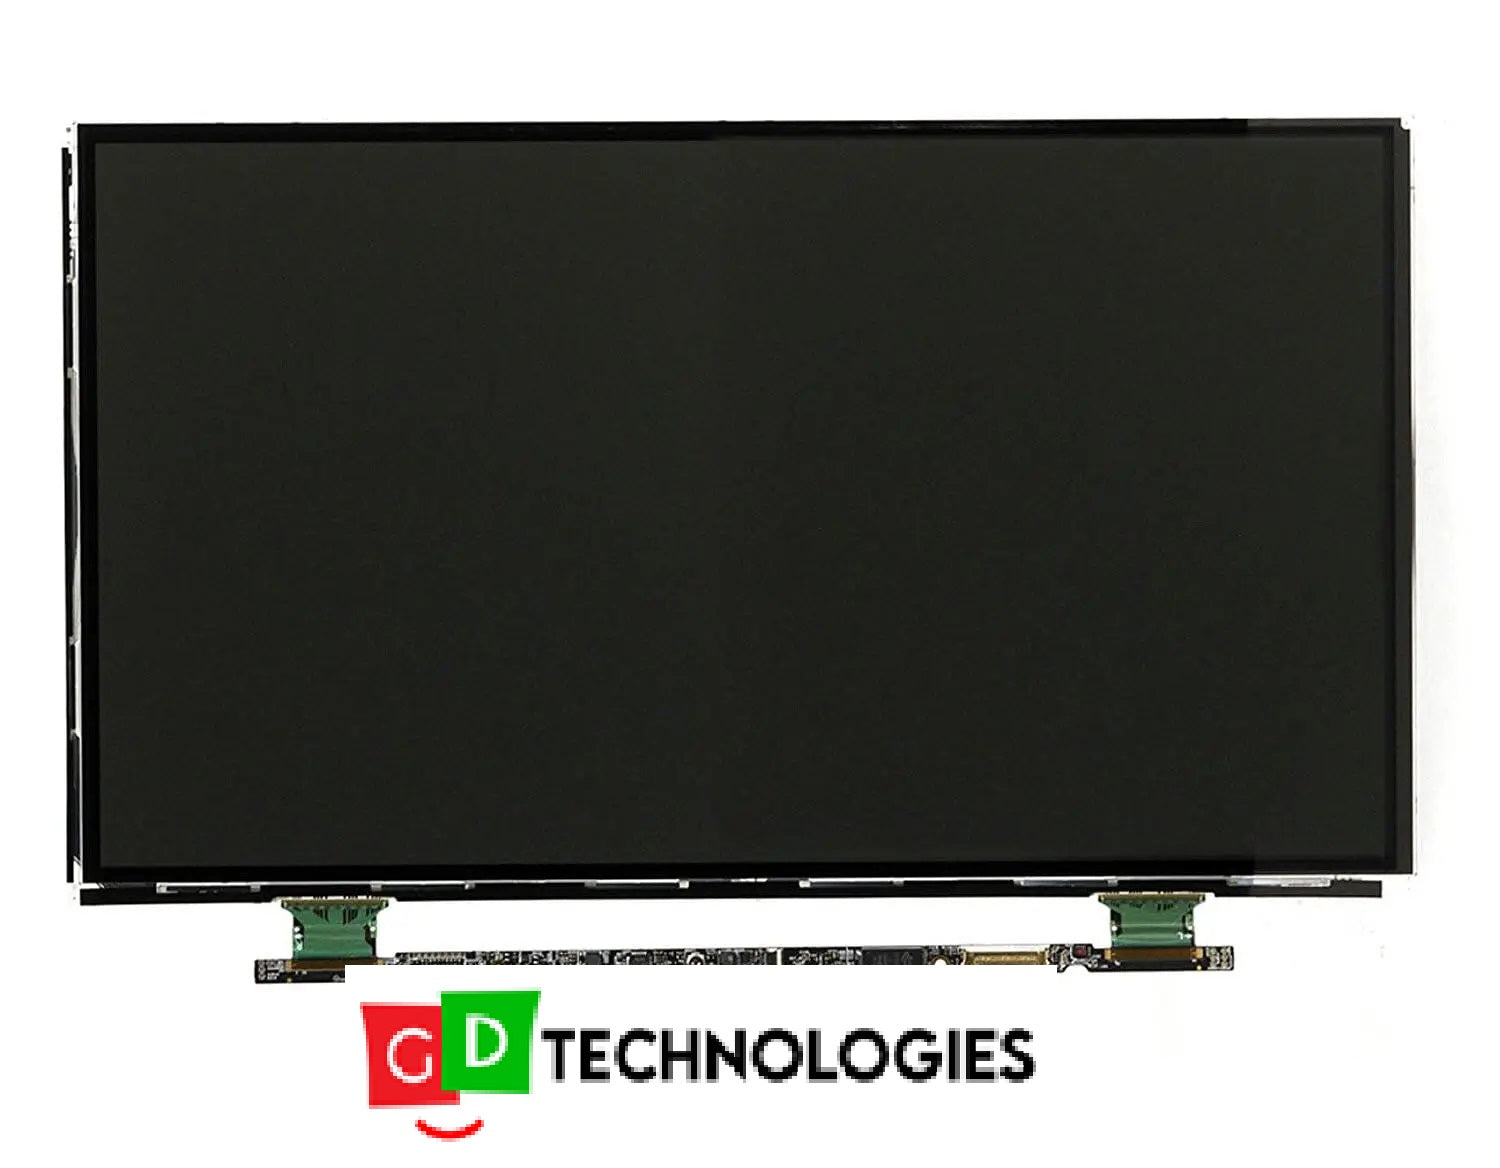 A1369 A1466 LCD Screen Display Panel for Apple MacBook Air 13 inch A1369 A1466 (Late 2010 – Mid 2017